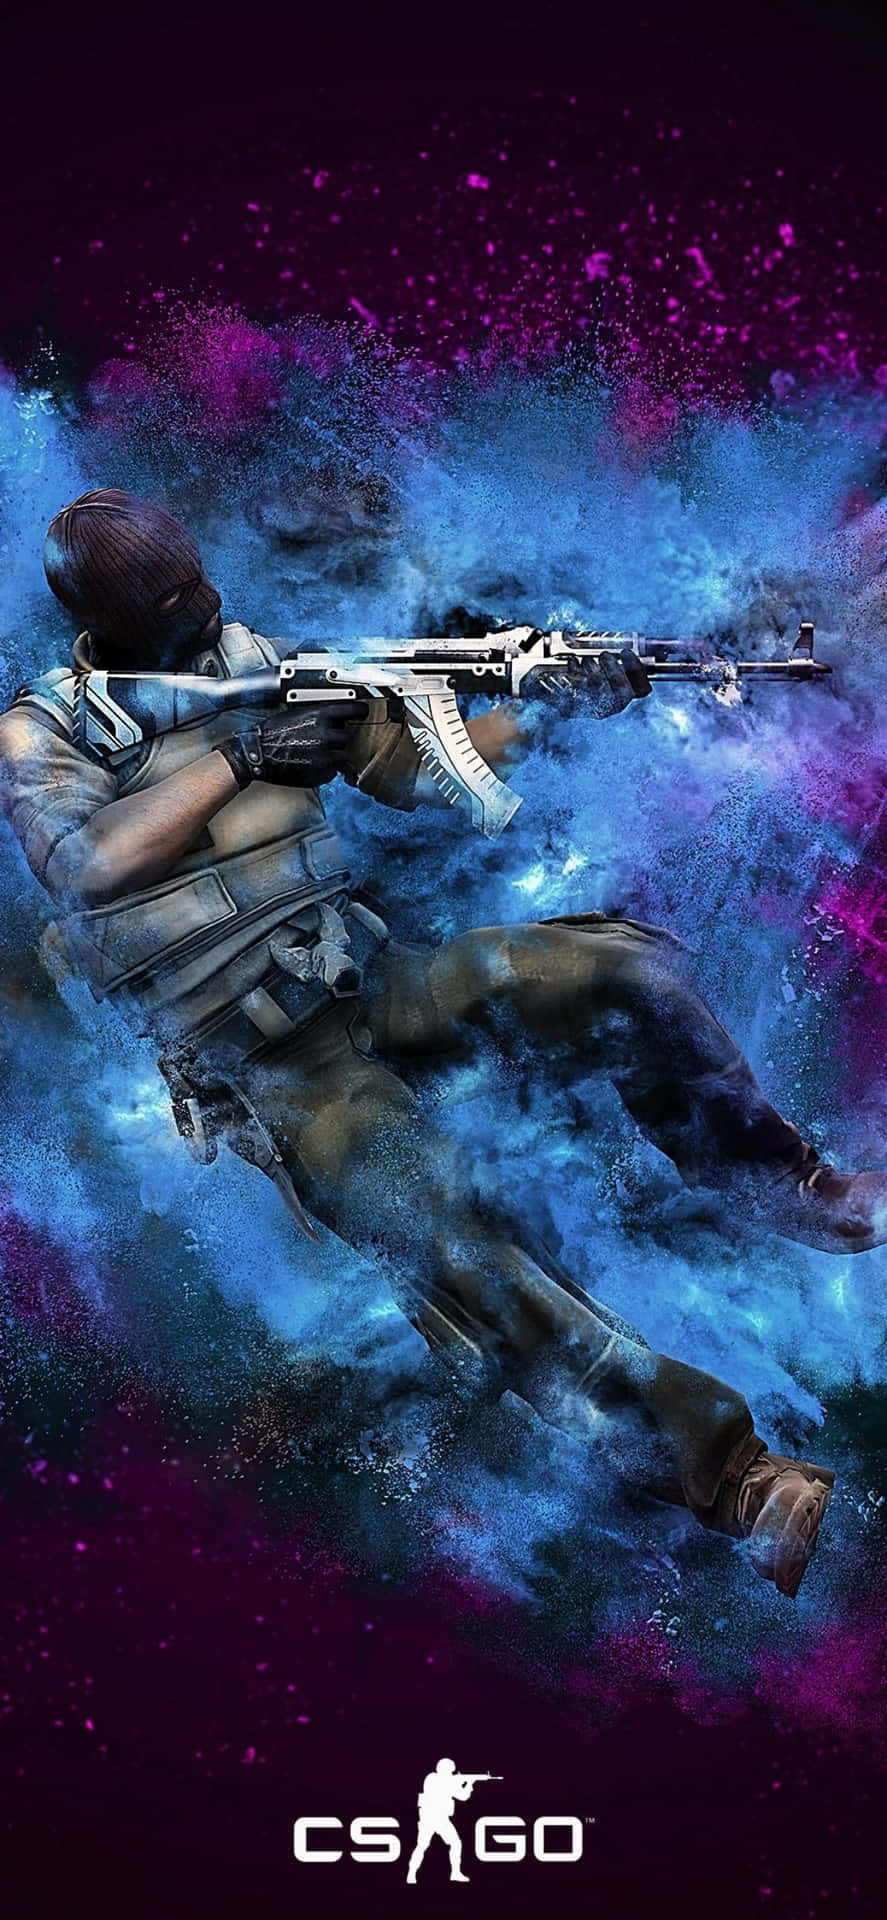 Enjoy the combat in Counter-Strike Global Offensive with the amazing picture quality of the Iphone Xs